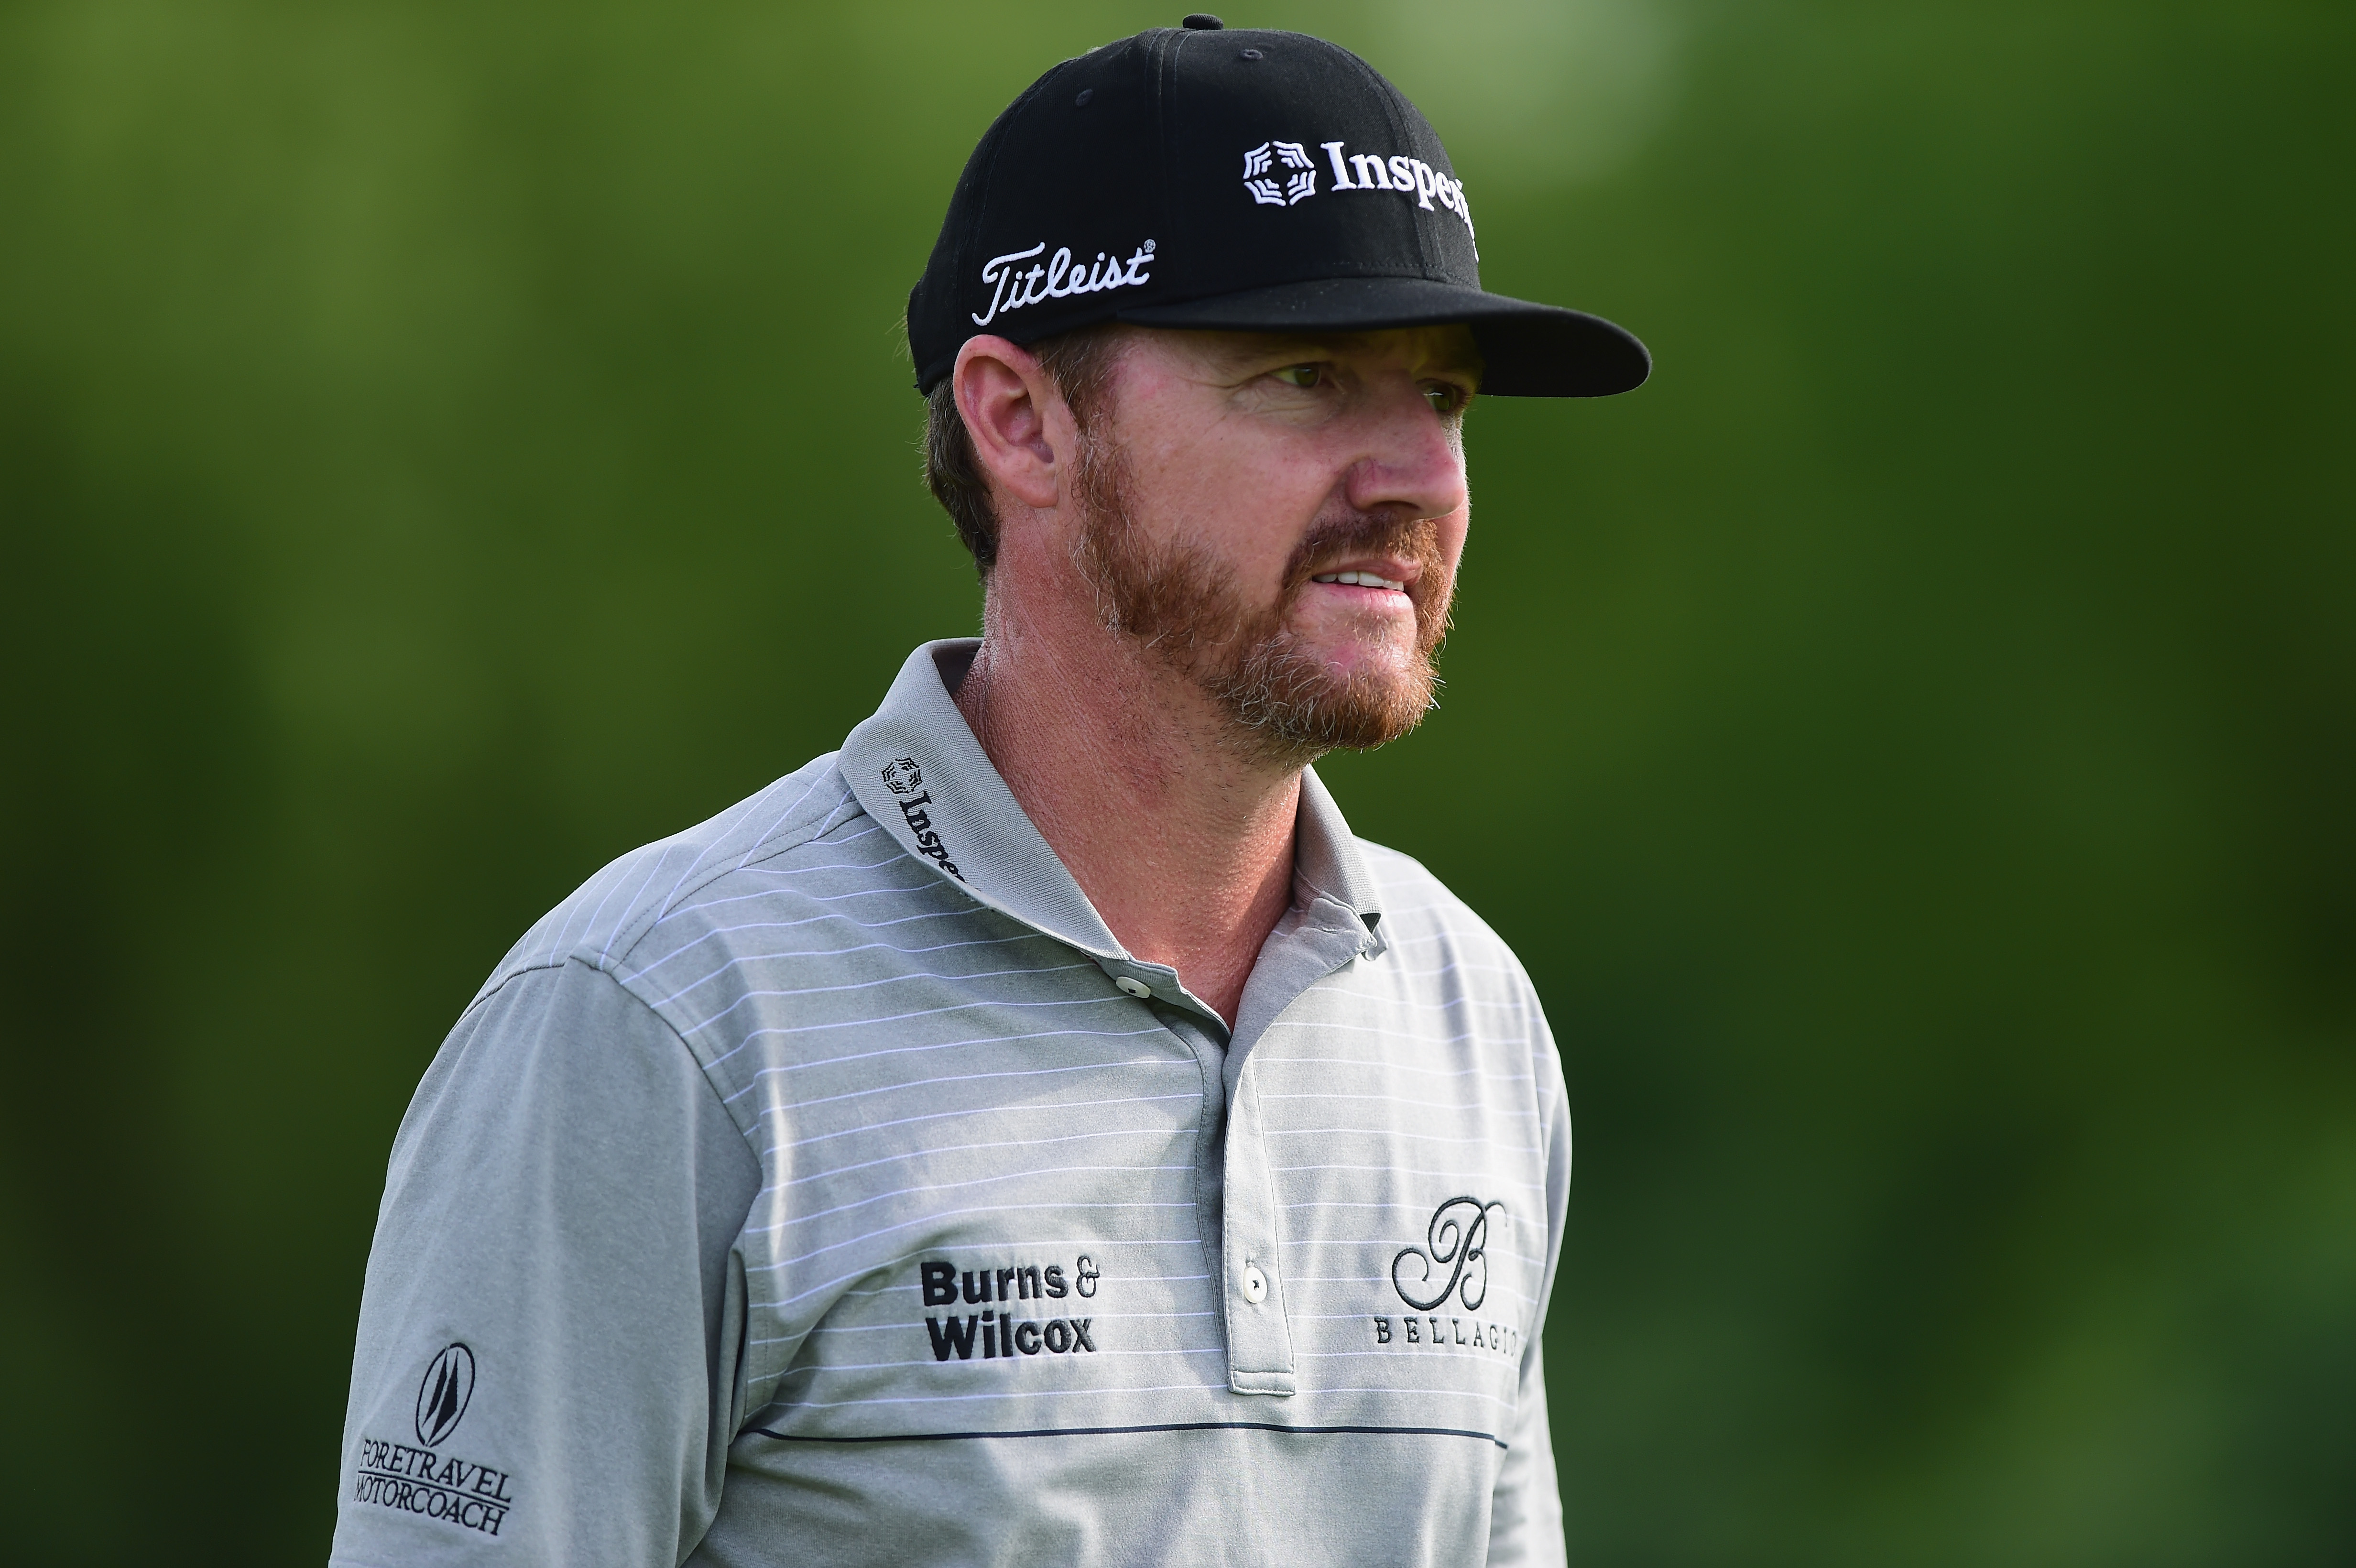 Jimmy Walker causes PGA Tour stir: It depends if you like the guy